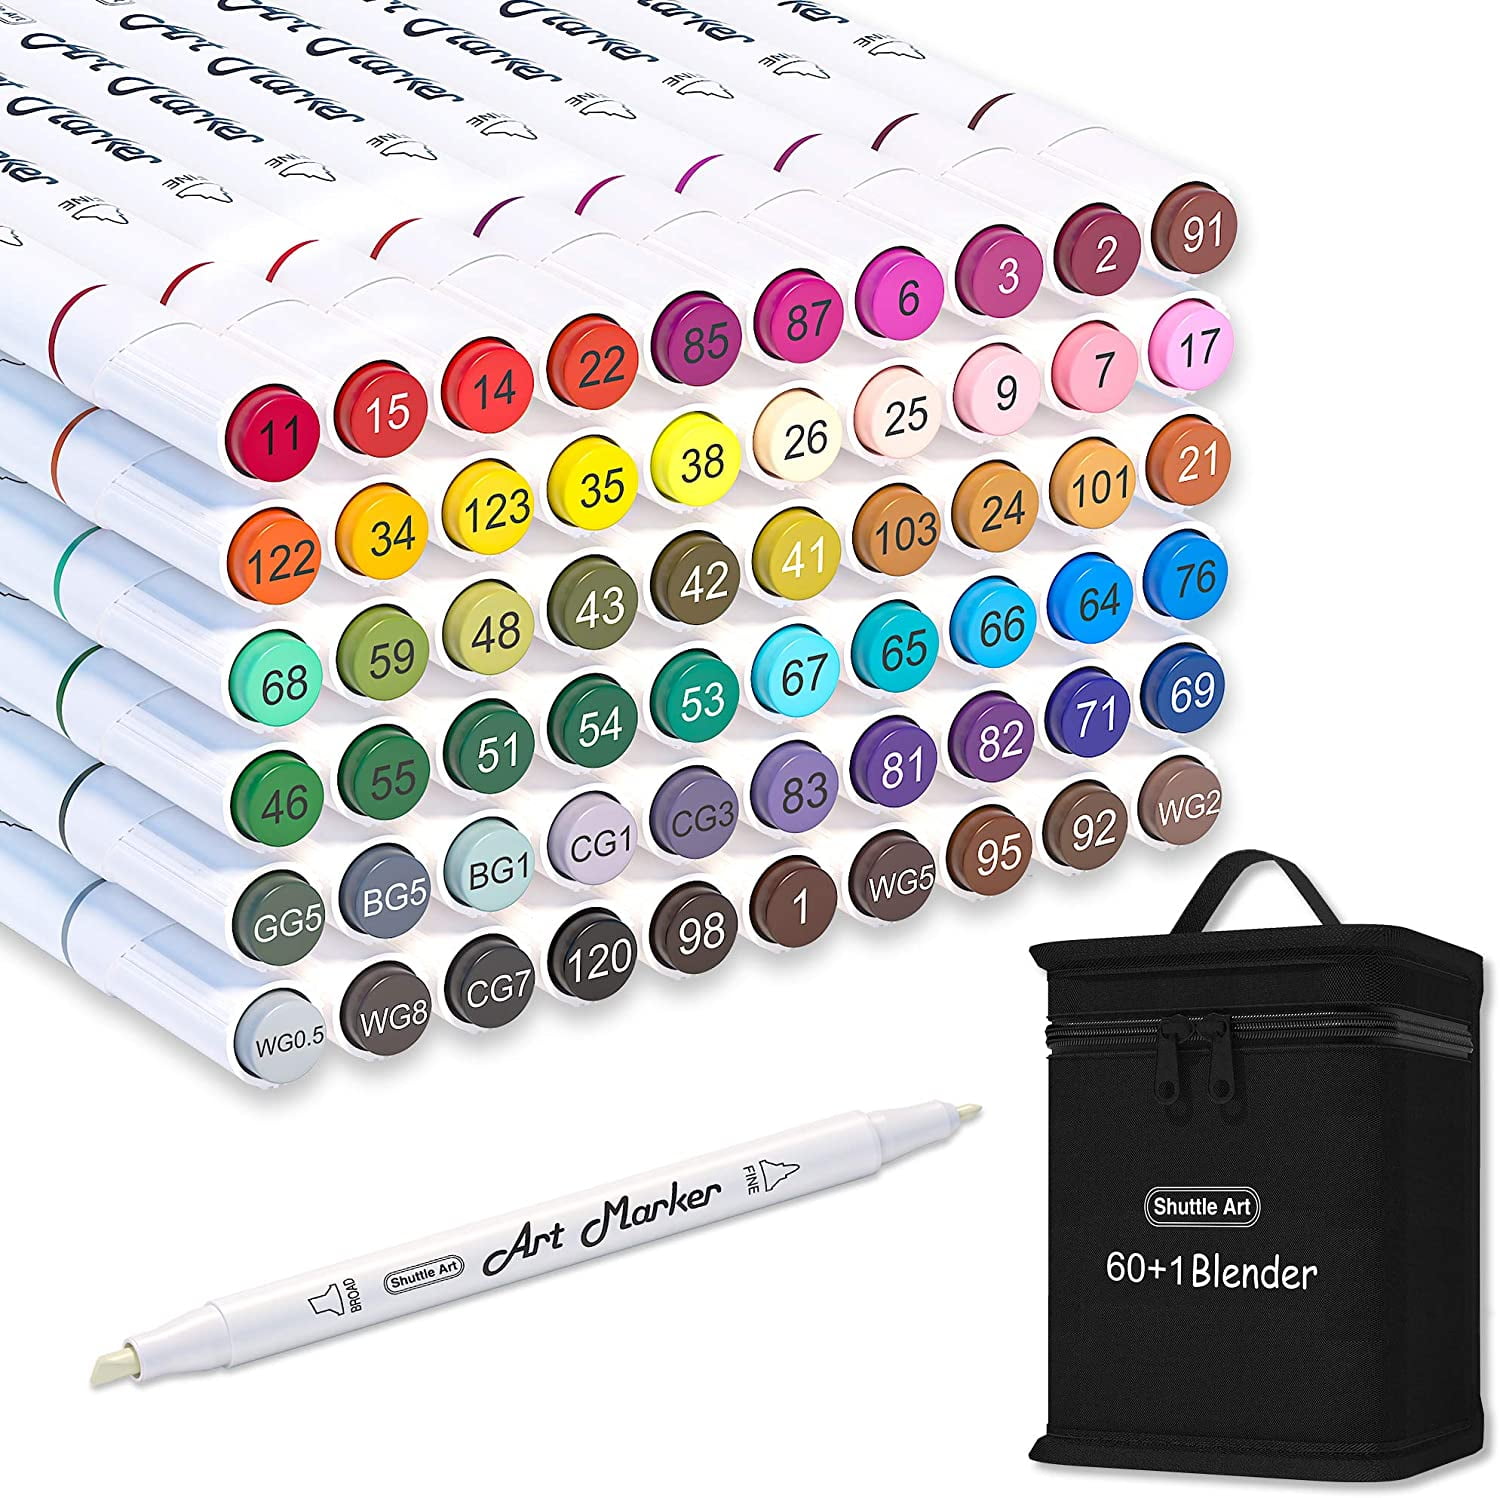 Concept Dual Tip Artistist Marker with Strathmore 500 Series Marker Pad 11  x 14 Basic Colors (Set of 24)